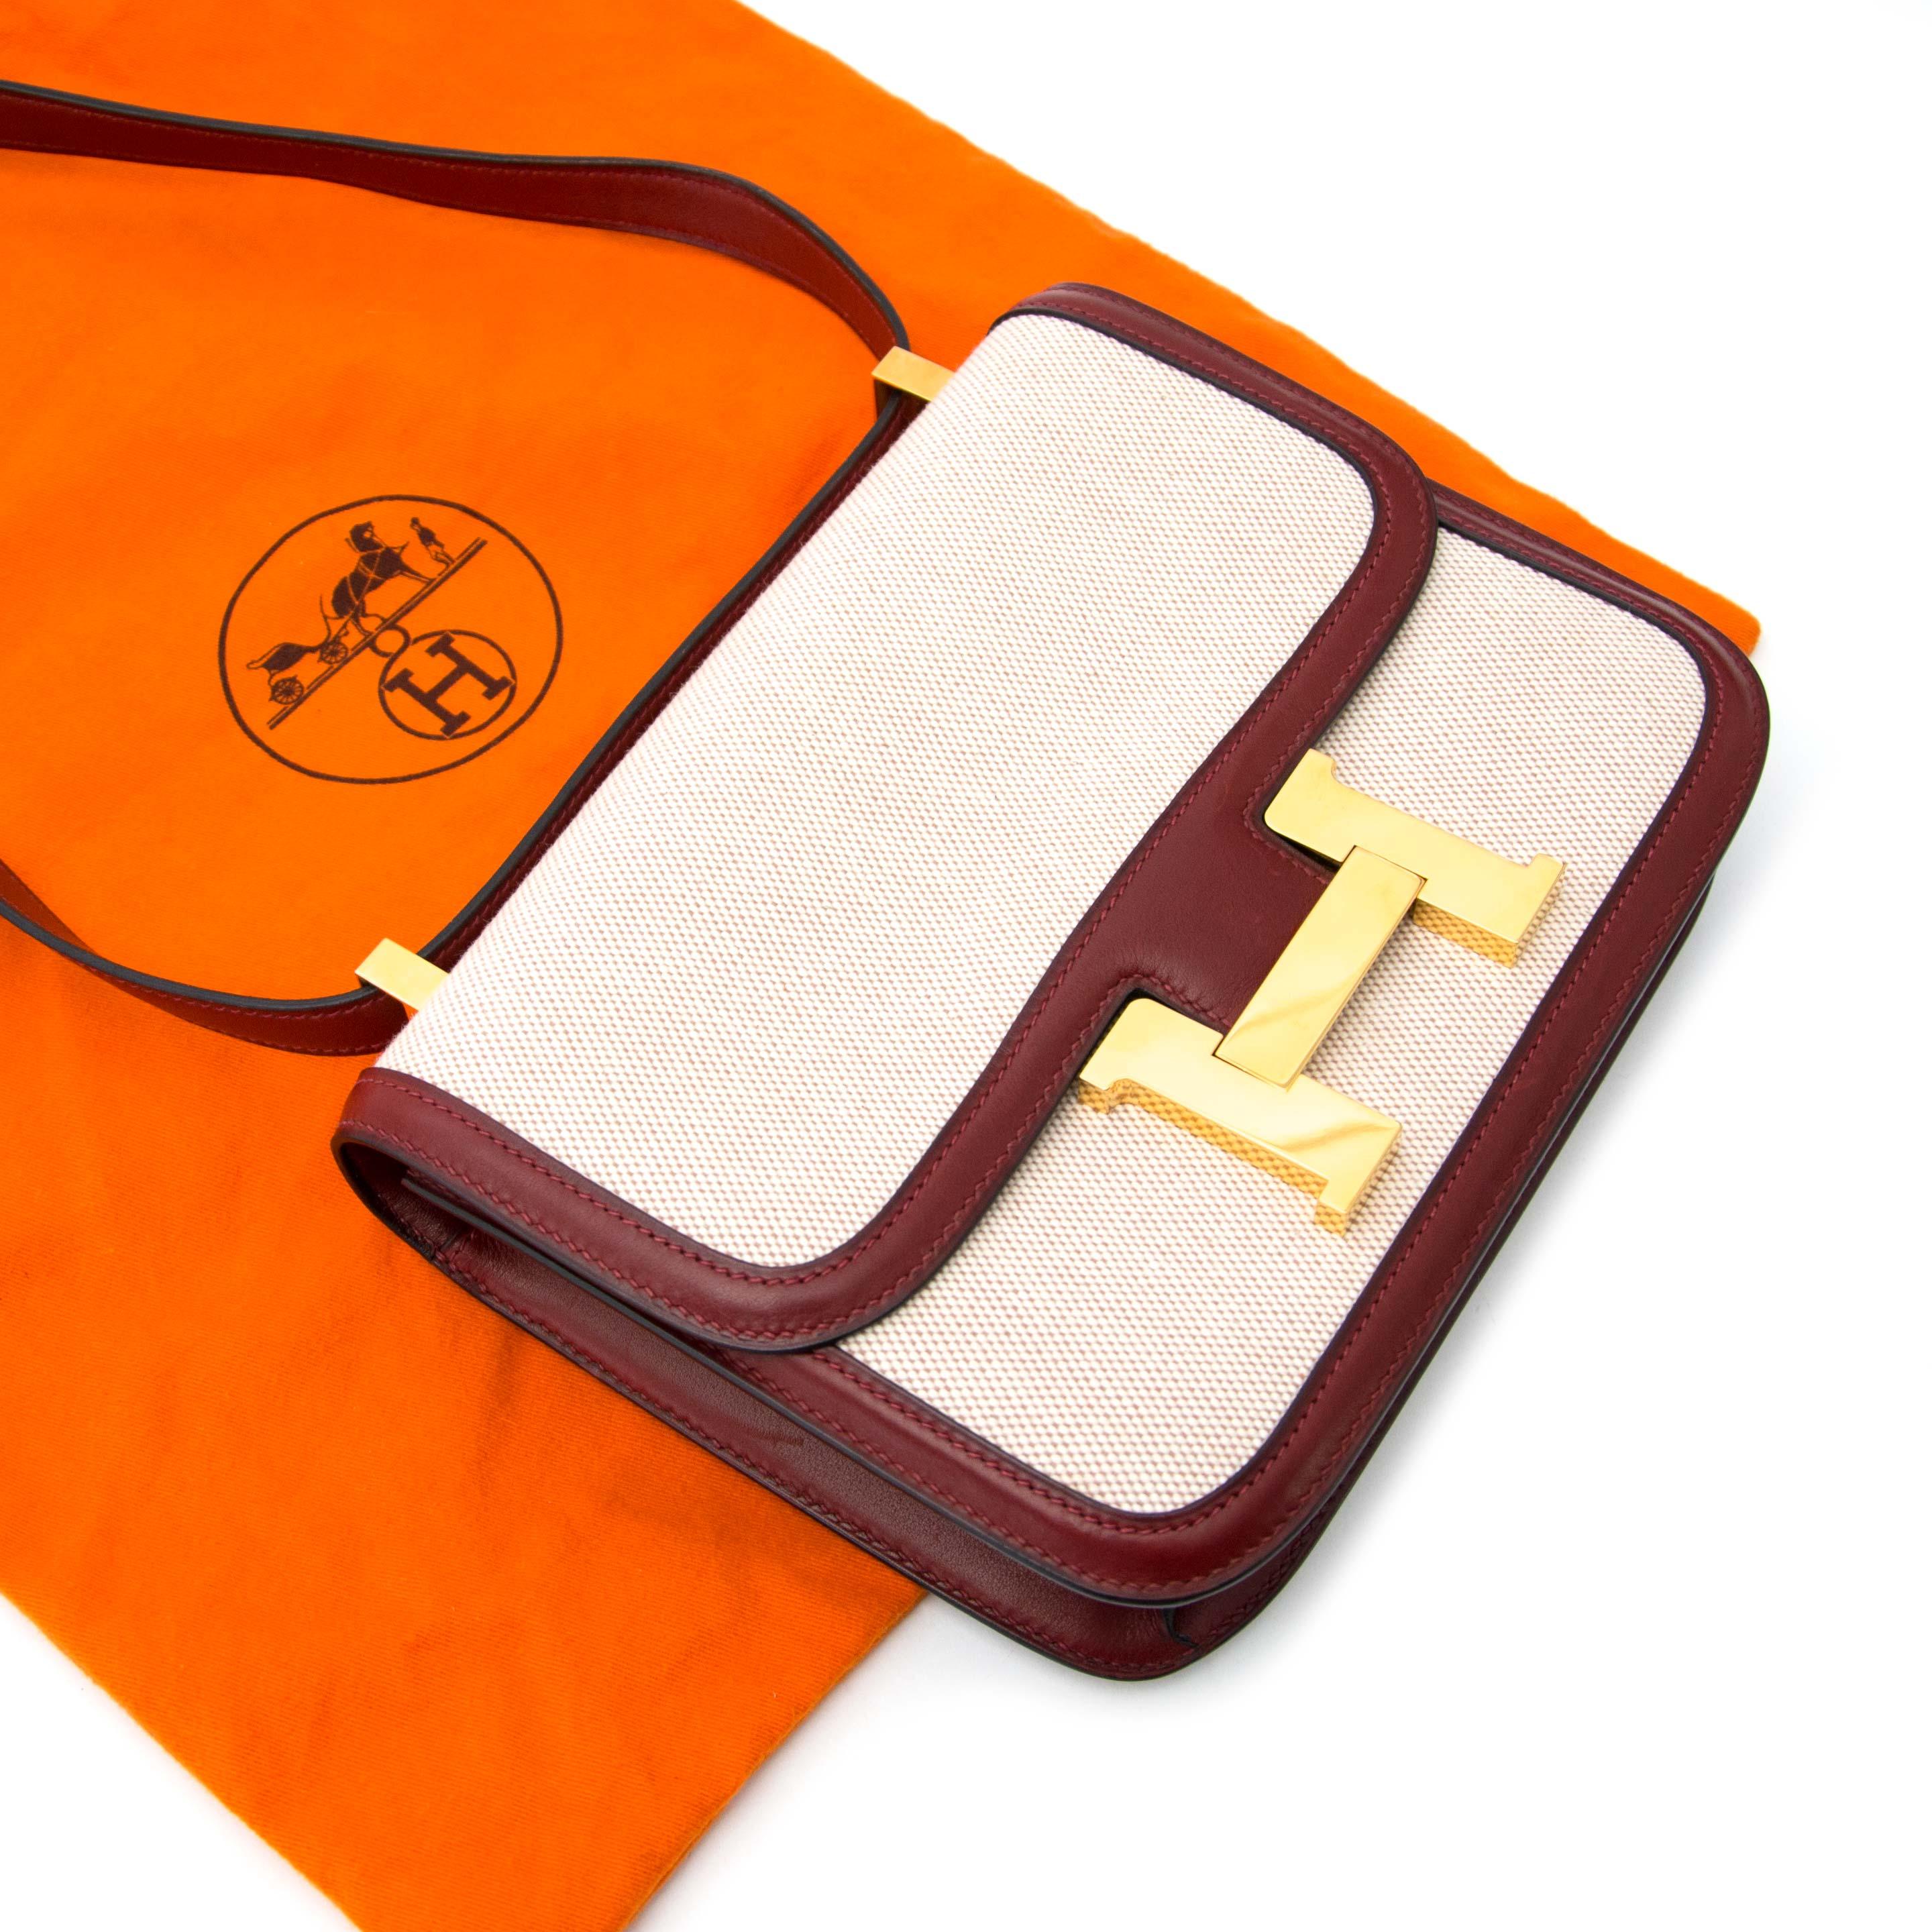 Very good condition

Hermès Constance Toile Bordeaux GHW

The Constance by Hermès is one of the house's most iconic designs. The understated chicness of this compact box bag presents itself in the distinctive gold-toned H buckle, the impeccable